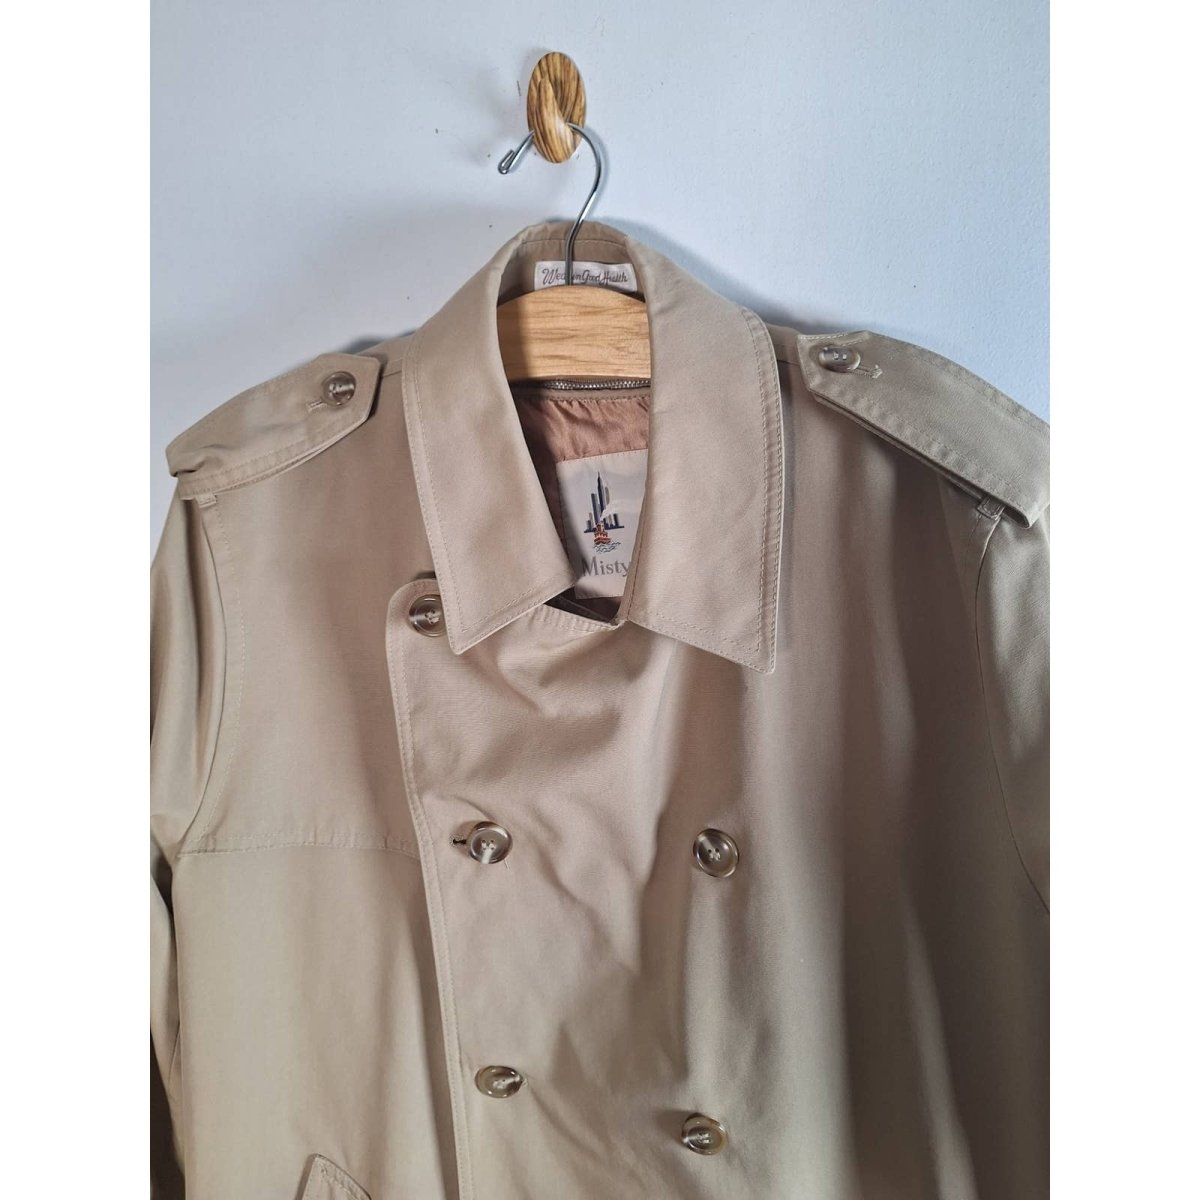 Vintage 80s/90s Misty Harbor Trench Coat Men's Size 42 Regular - themallvintage The Mall Vintage